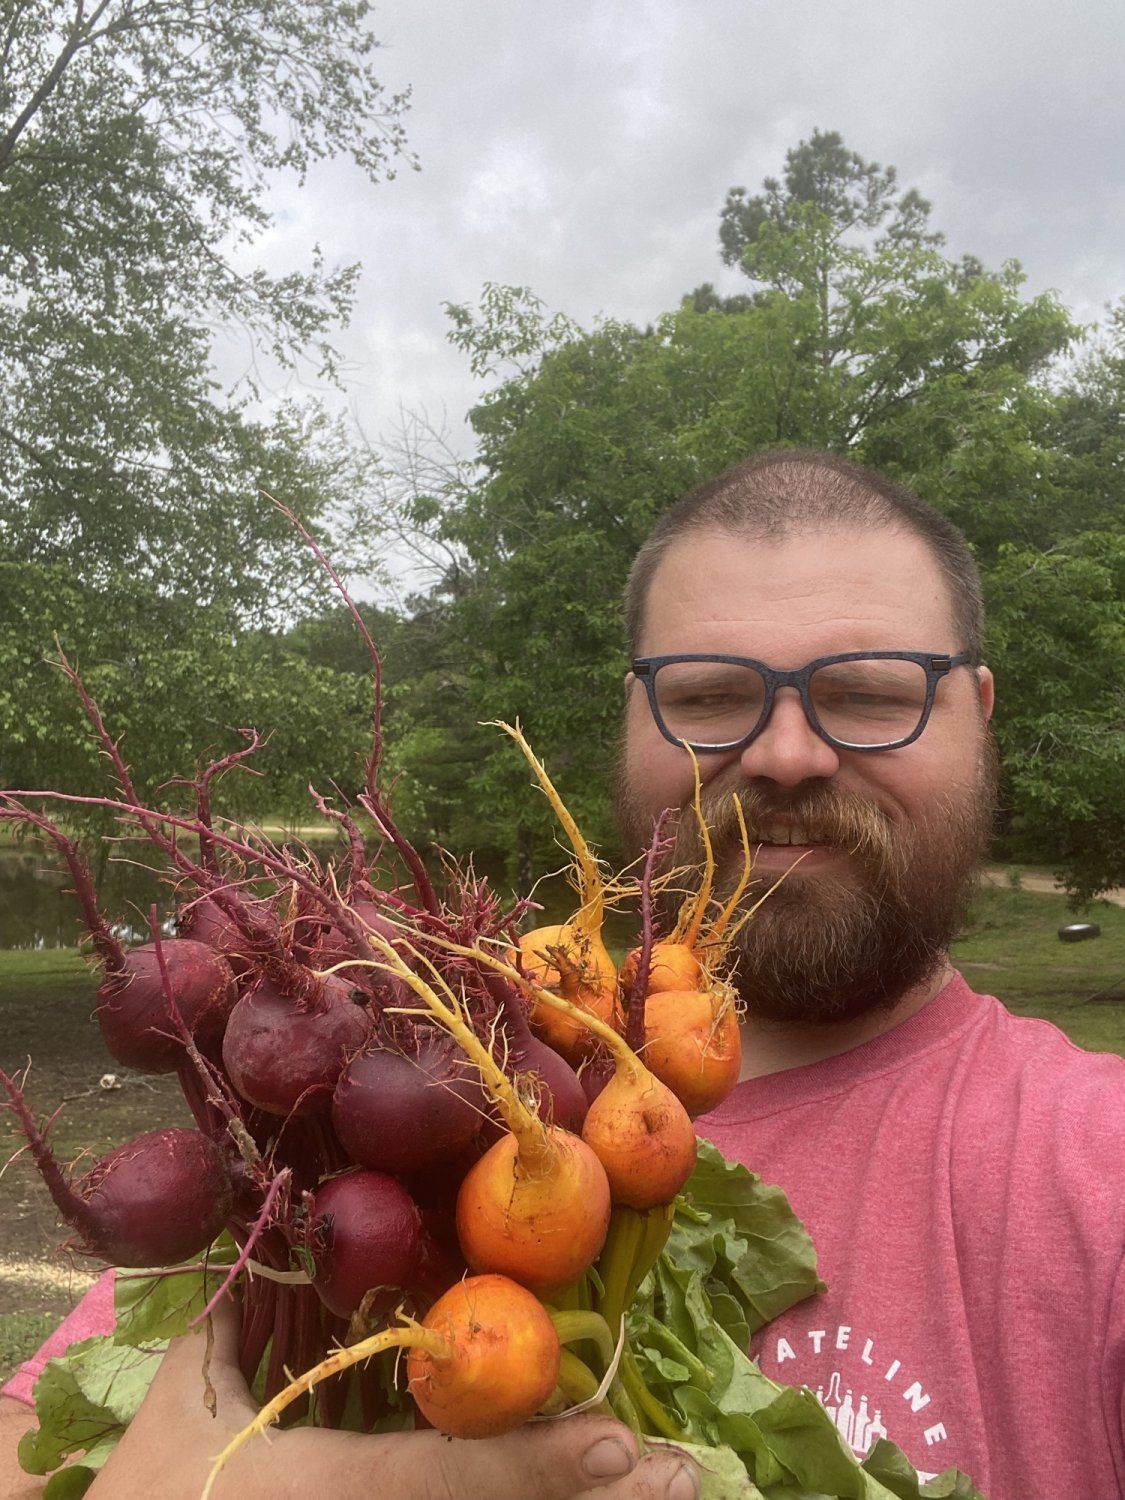 You Can't BEET Locally Grown Produce From Folks You Know!